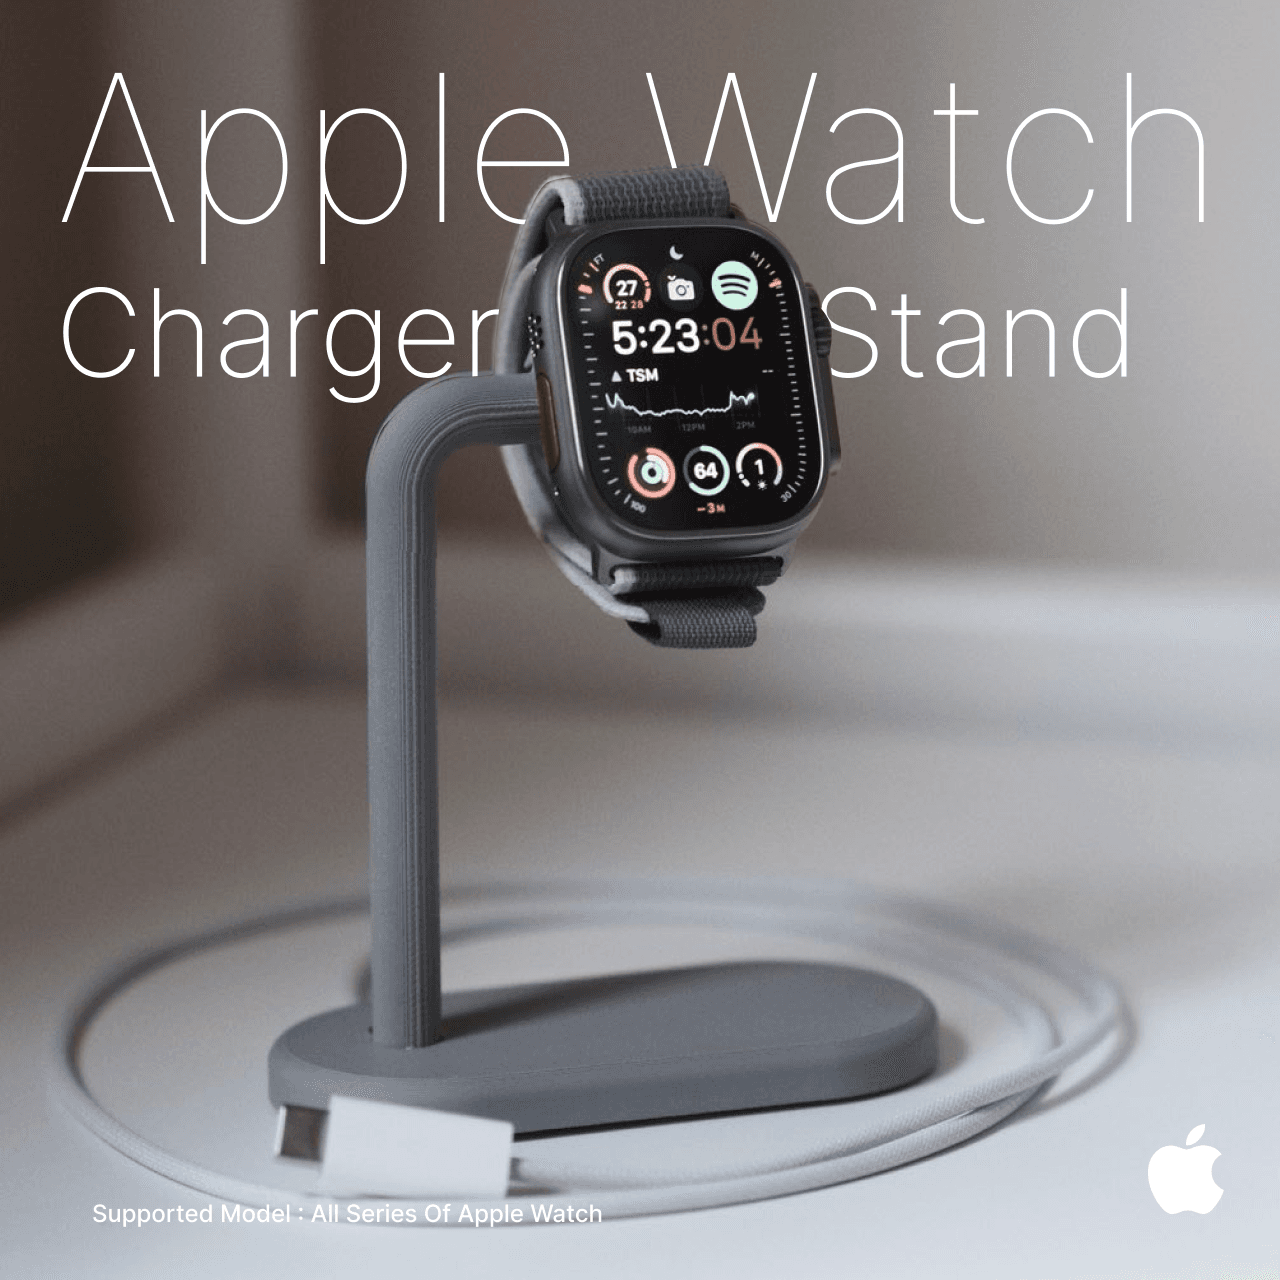 APPLE WATCH CHARGER MINI STAND 3d model